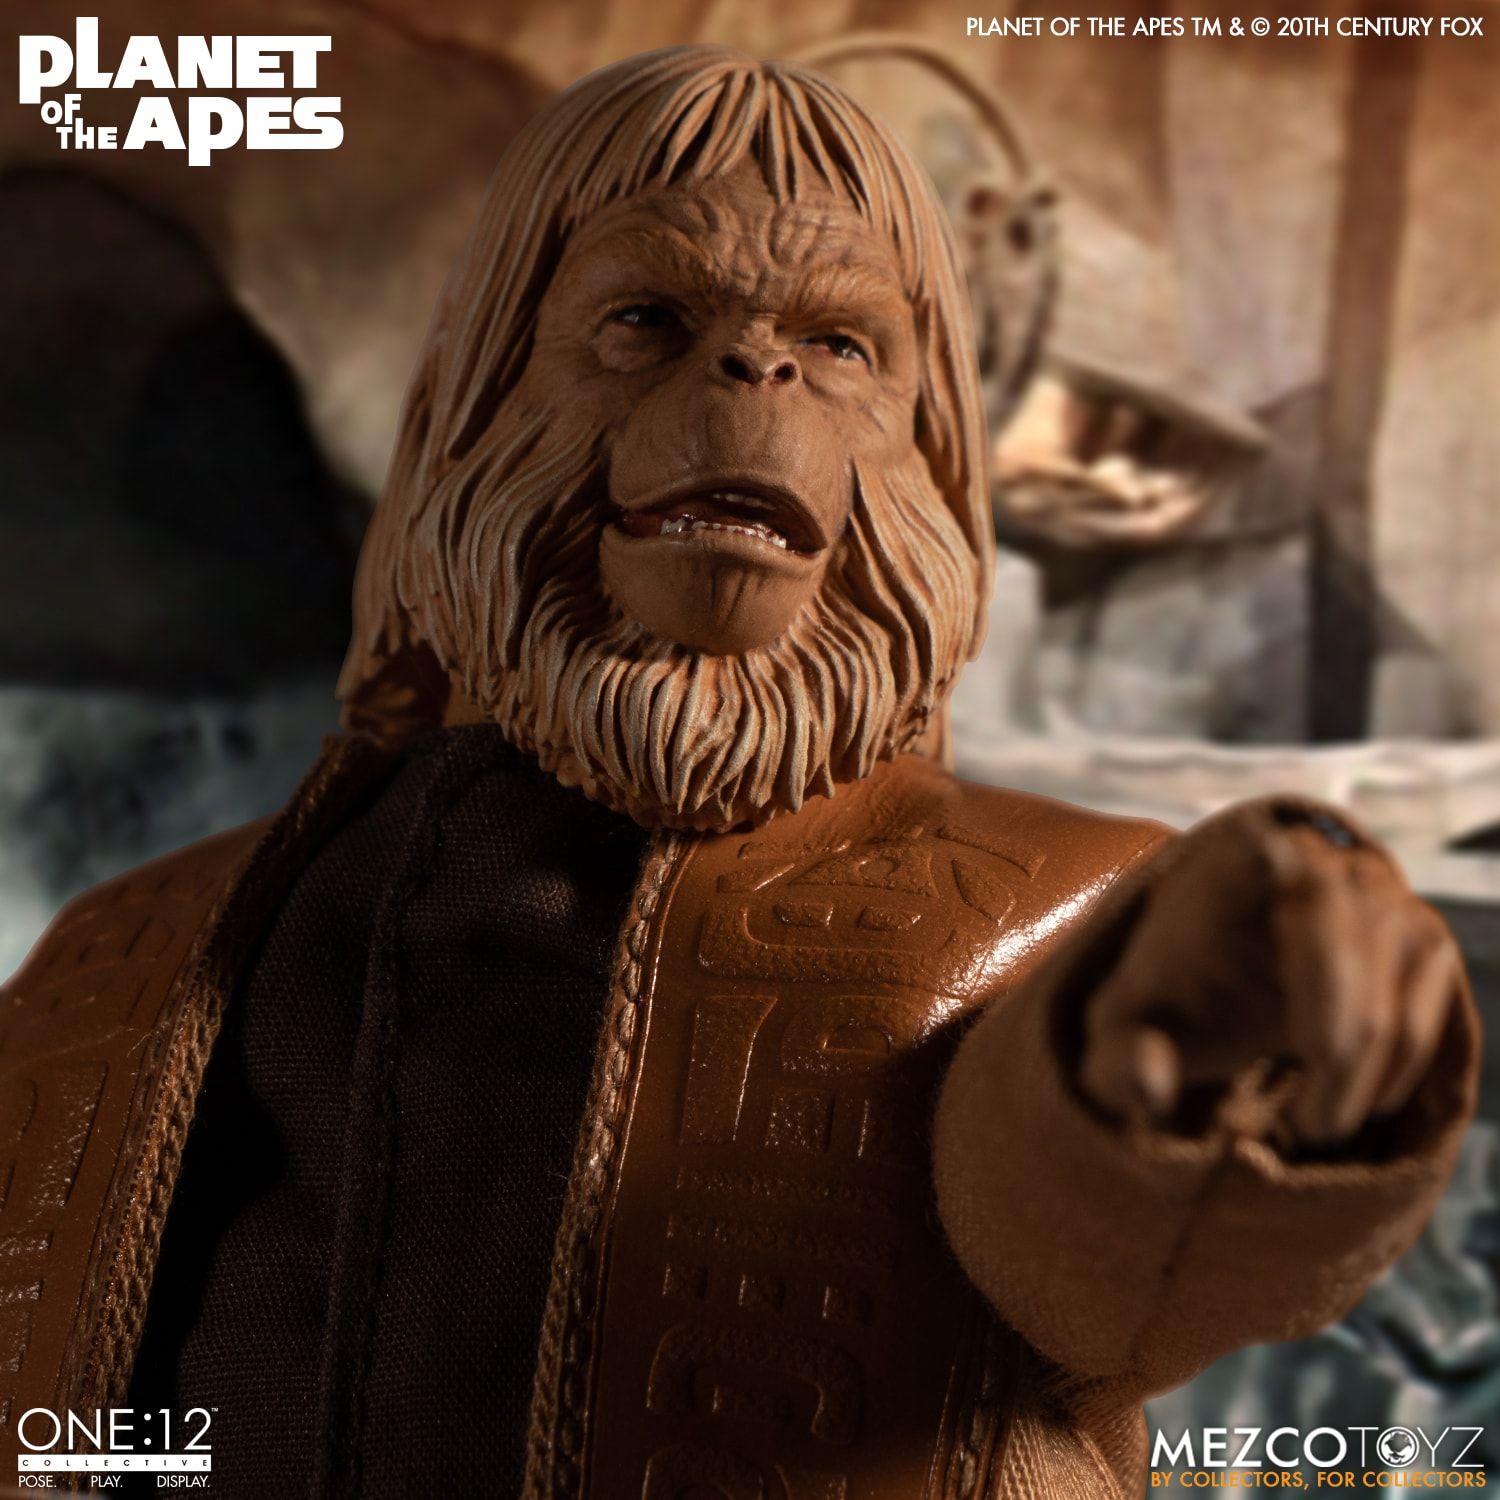 Mezco - One:12 Collective - Planet of the Apes (1968) - Dr. Zaius